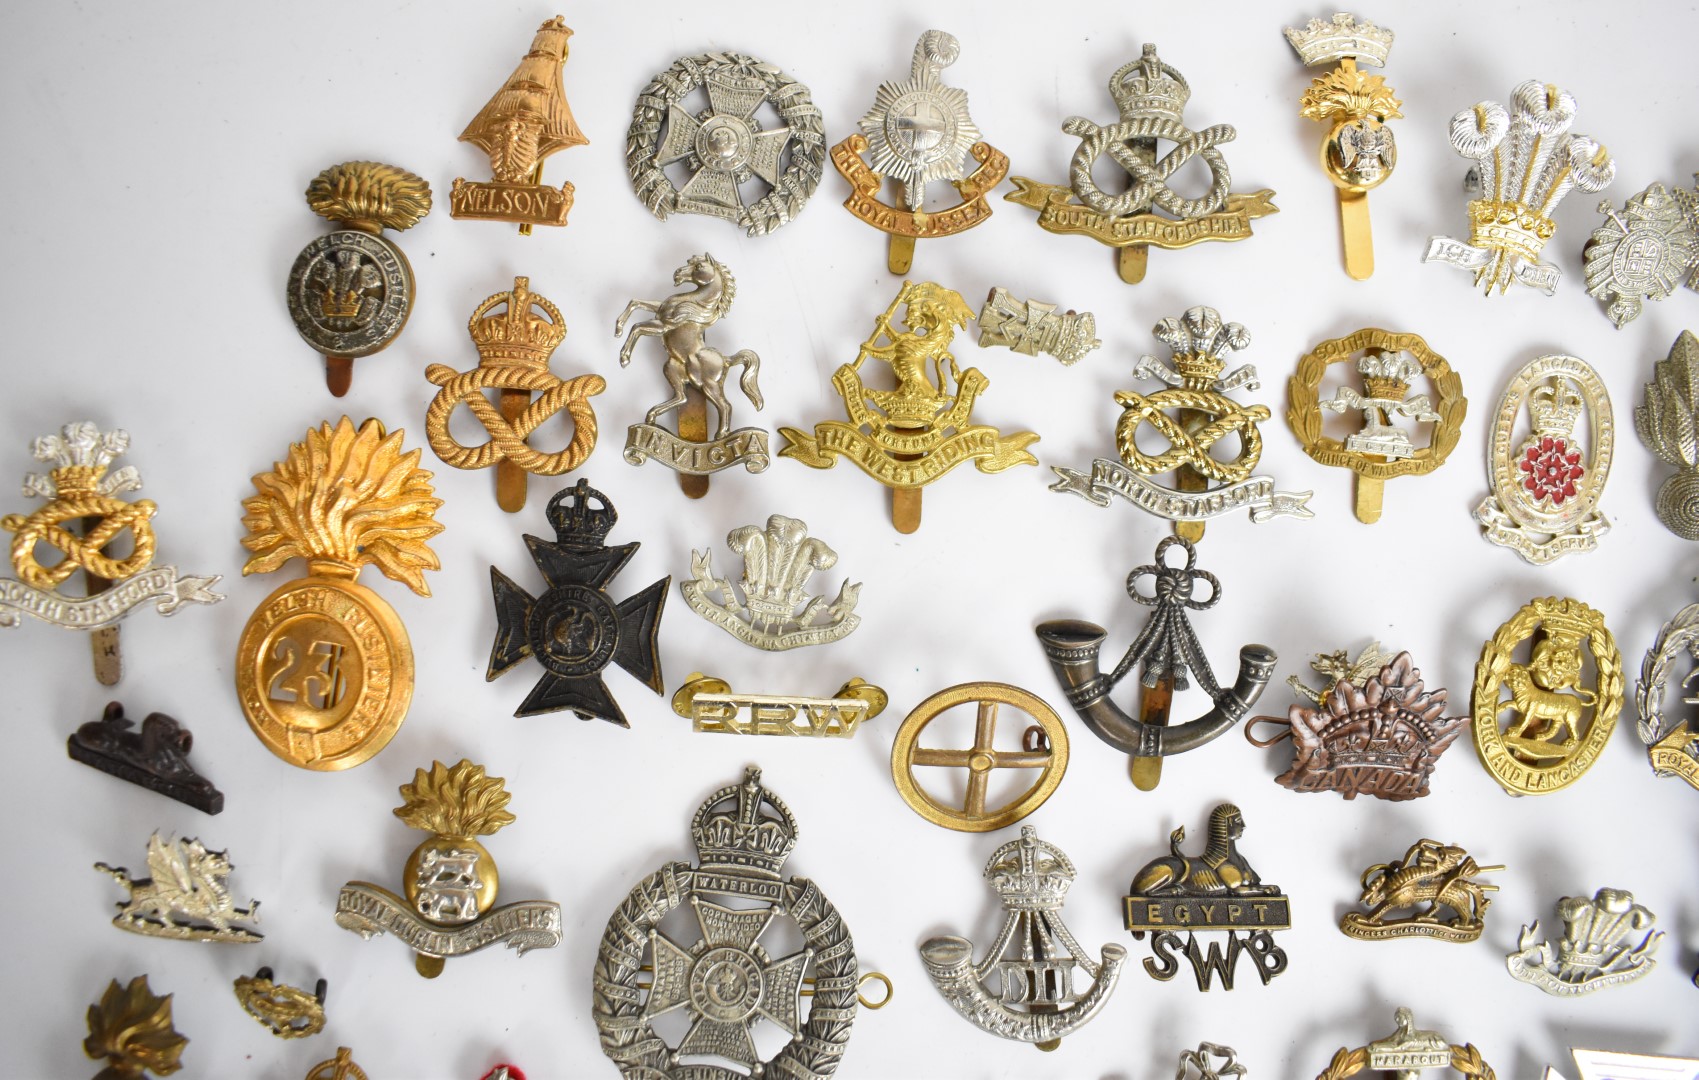 Large collection of approximately 100 British Army cap badges including Royal Sussex Regiment, - Image 6 of 14